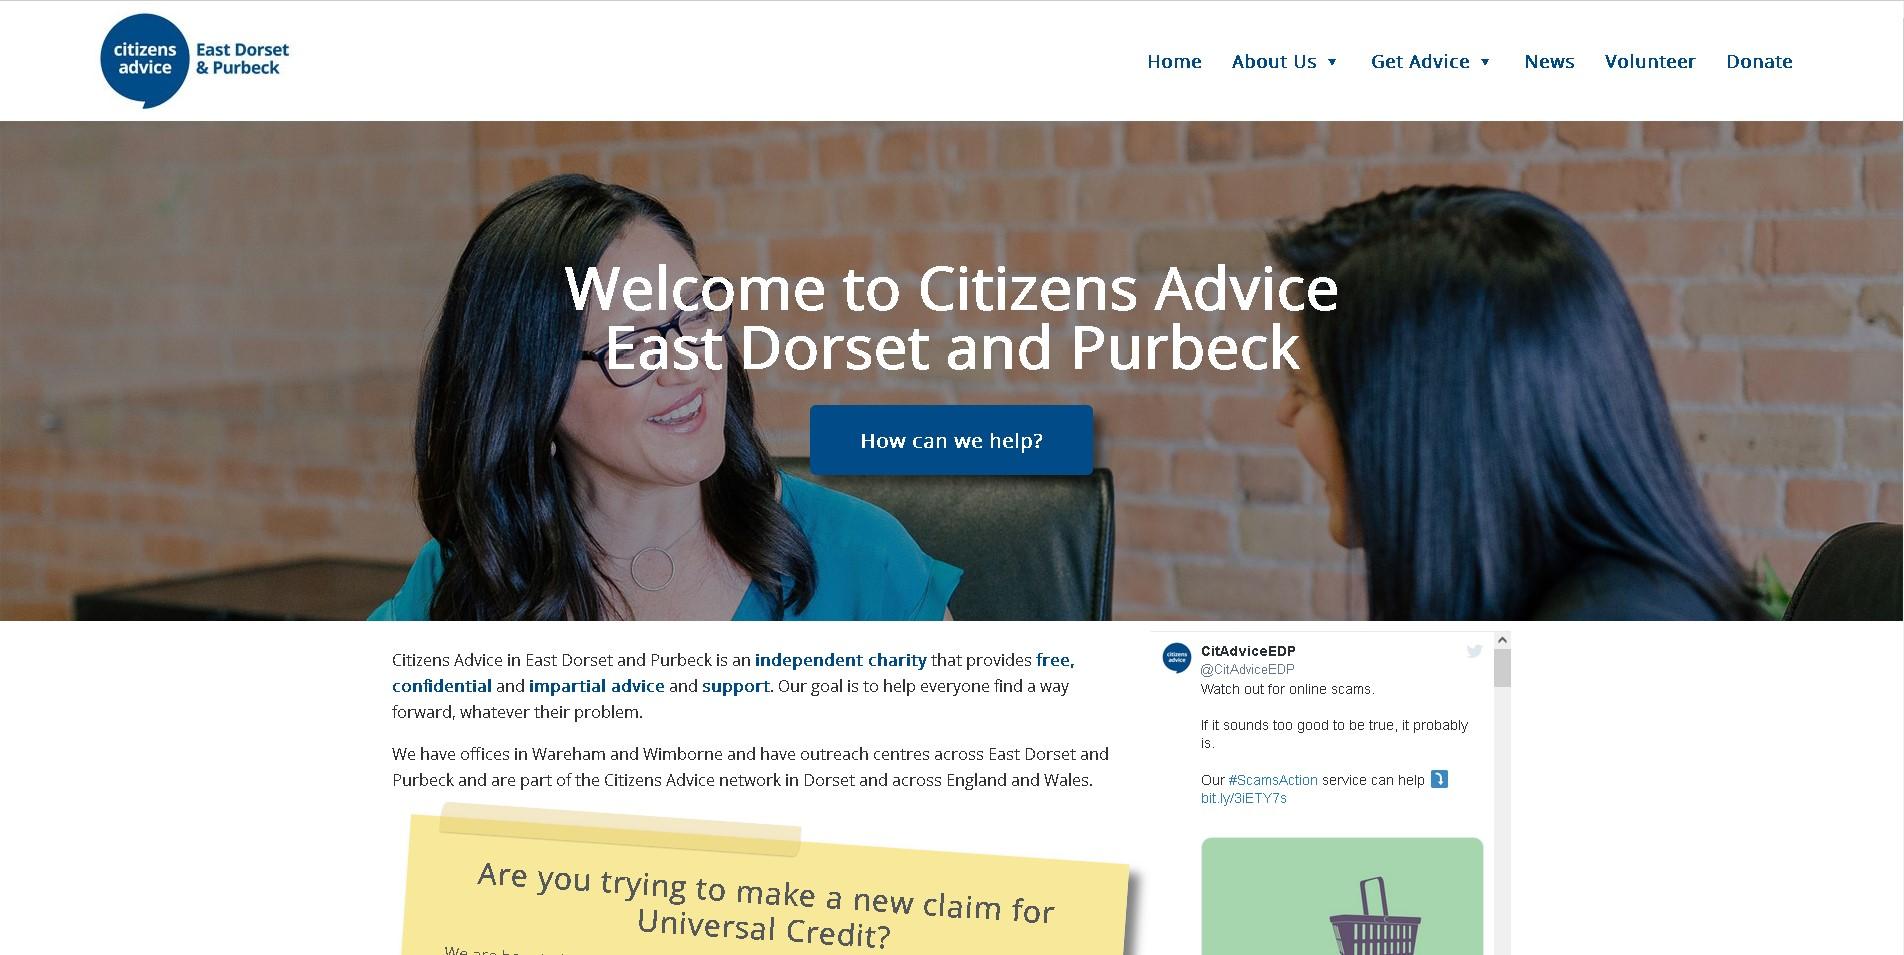 Citizens Advice East Dorset and Purbeck